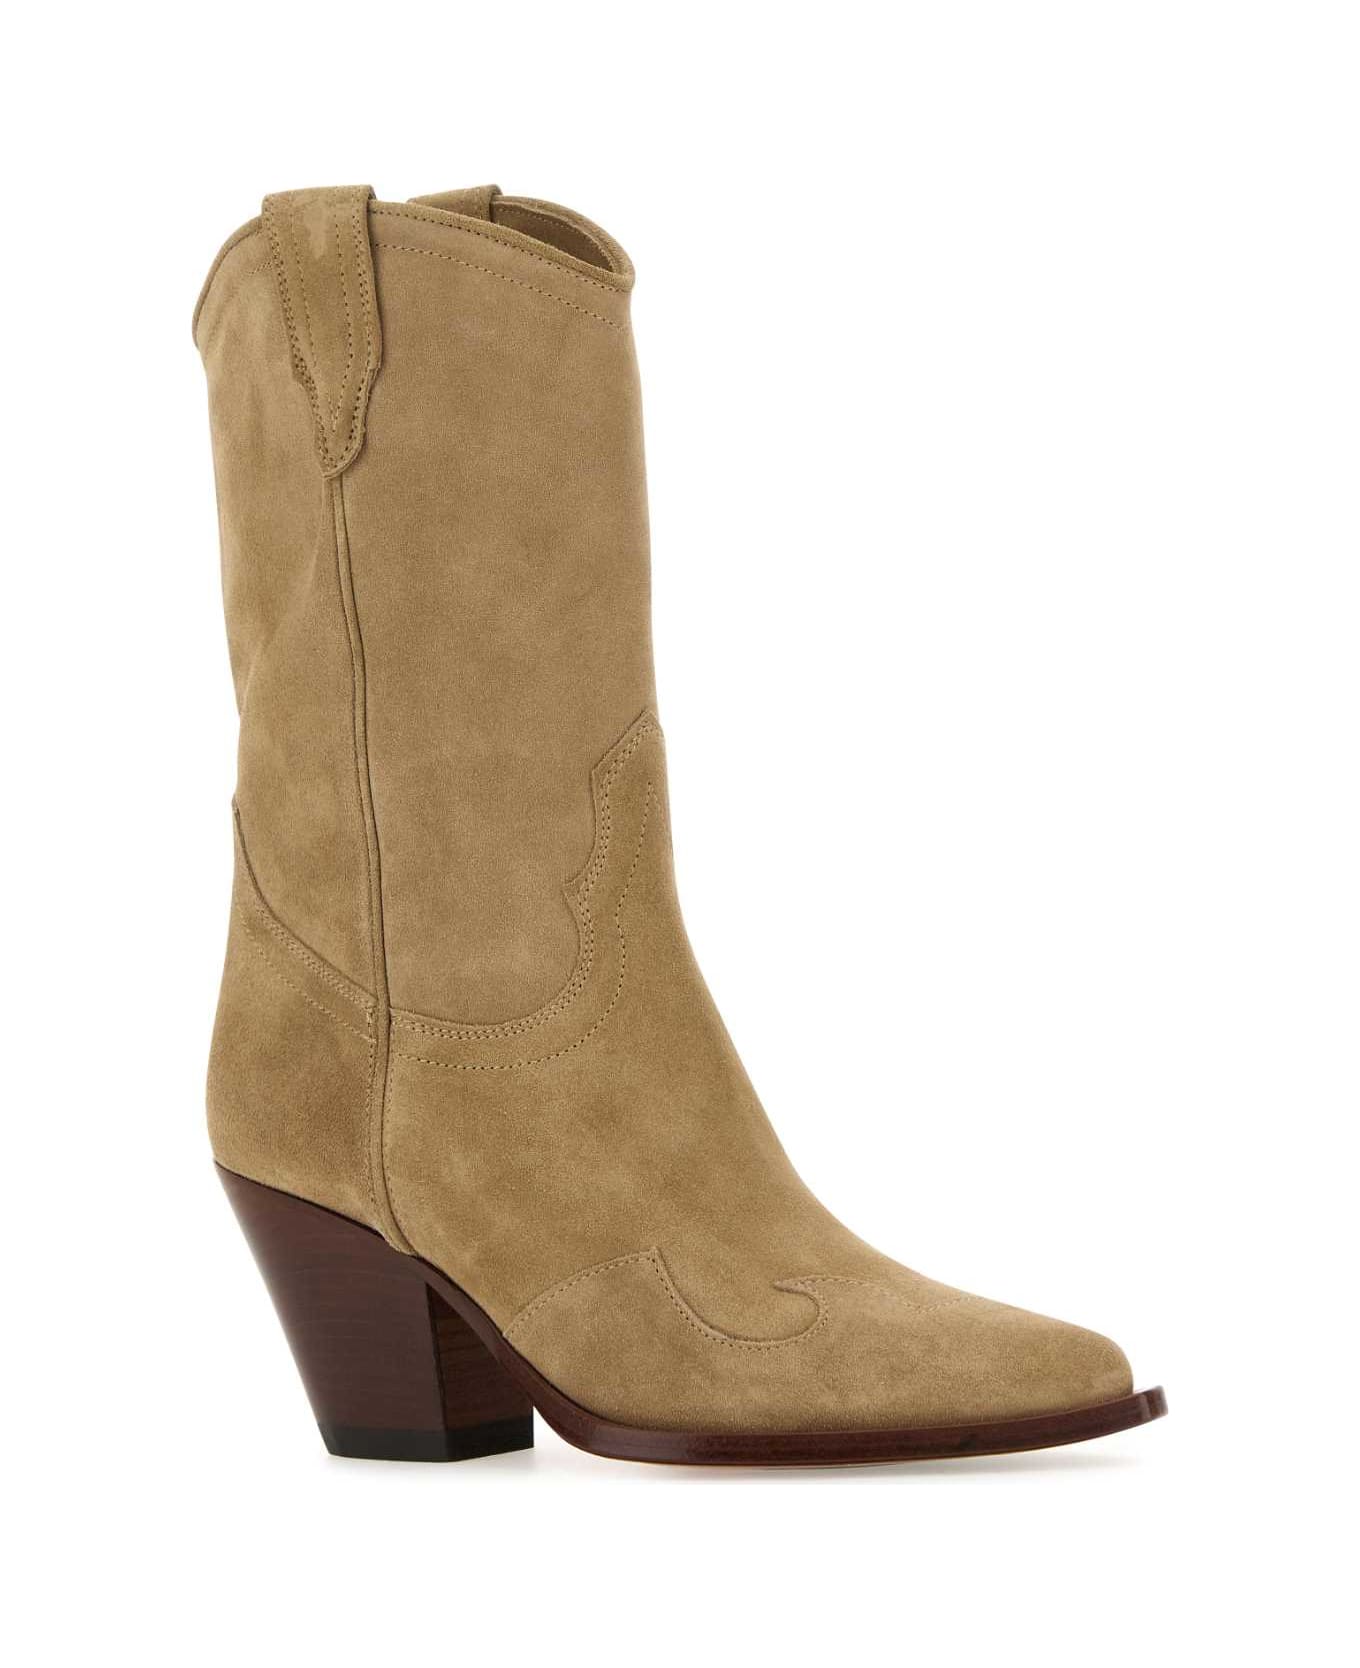 Sonora Cappuccino Suede Santa Clara Ankle Boots - TAUPE ブーツ